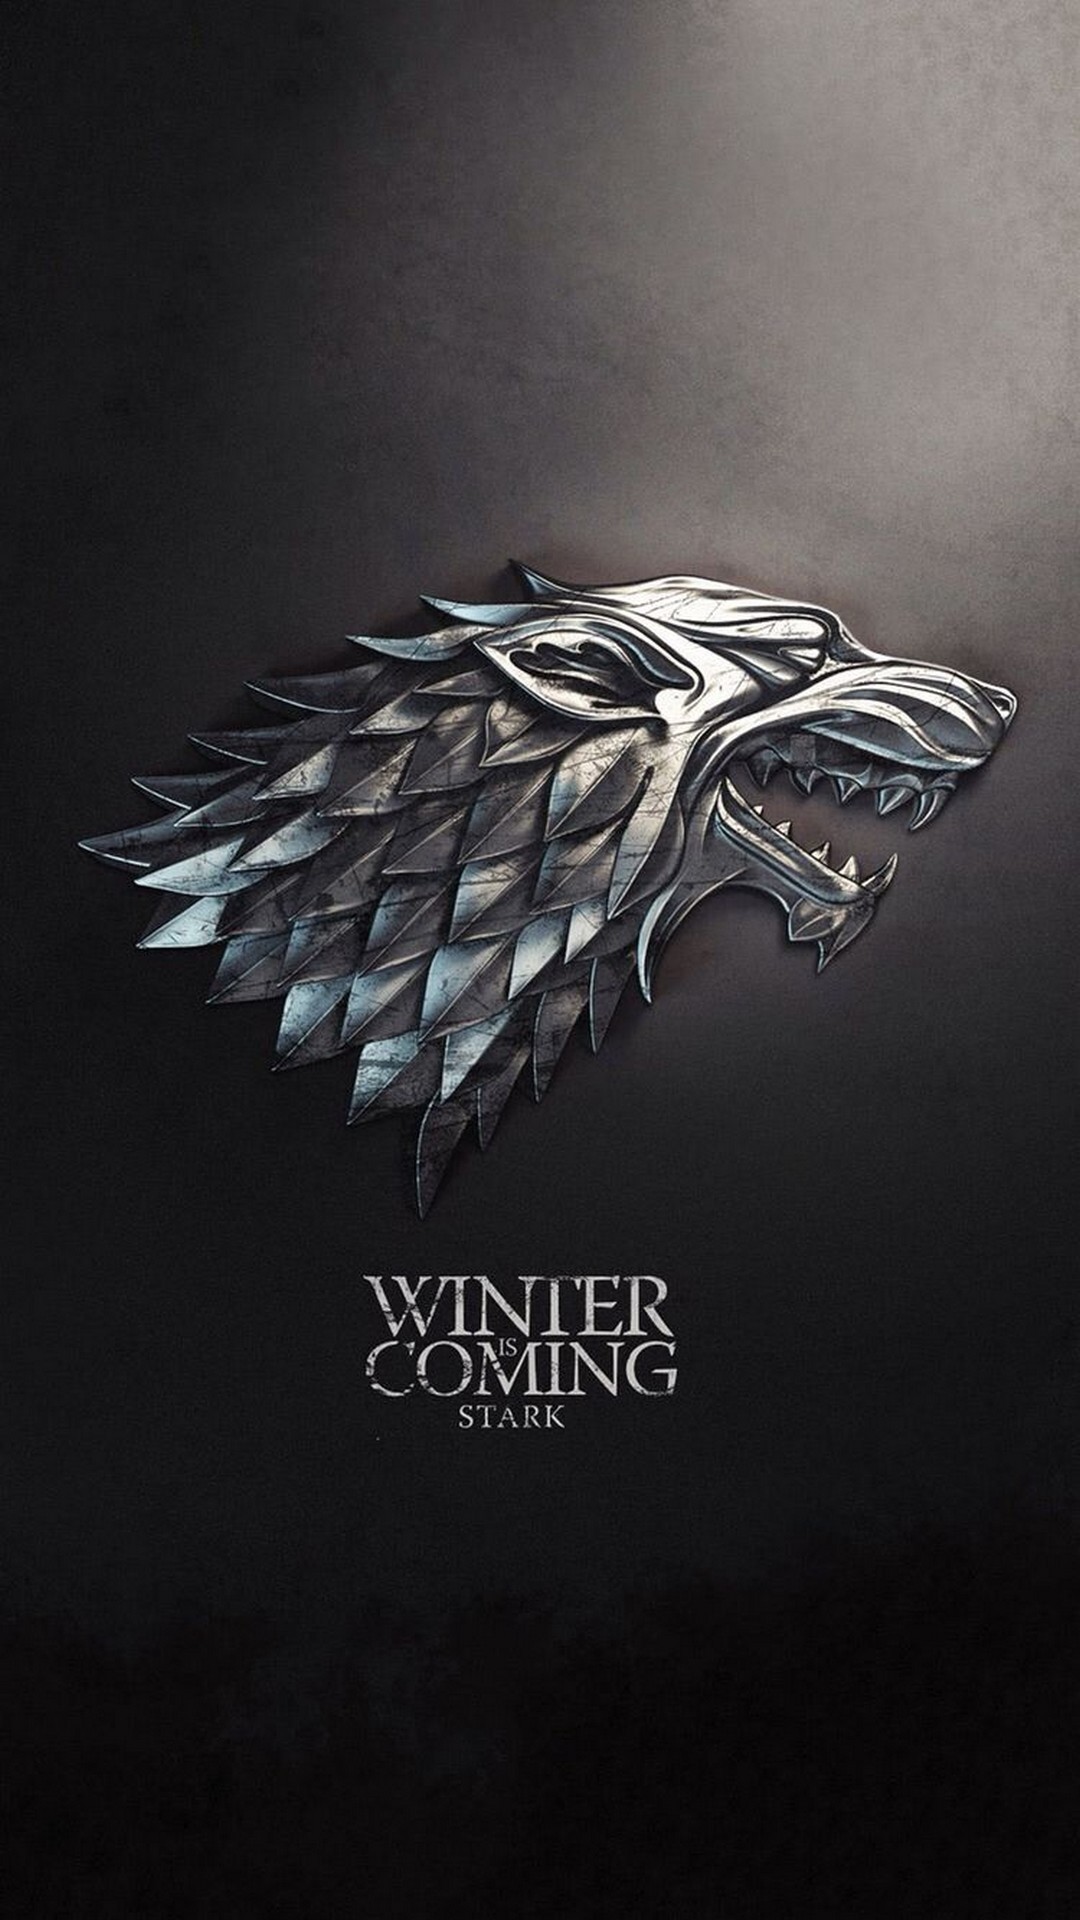 House Stark Game of Thrones iPhone Wallpaper with high-resolution 1080x1920 pixel. You can use this wallpaper for your iPhone 5, 6, 7, 8, X, XS, XR backgrounds, Mobile Screensaver, or iPad Lock Screen